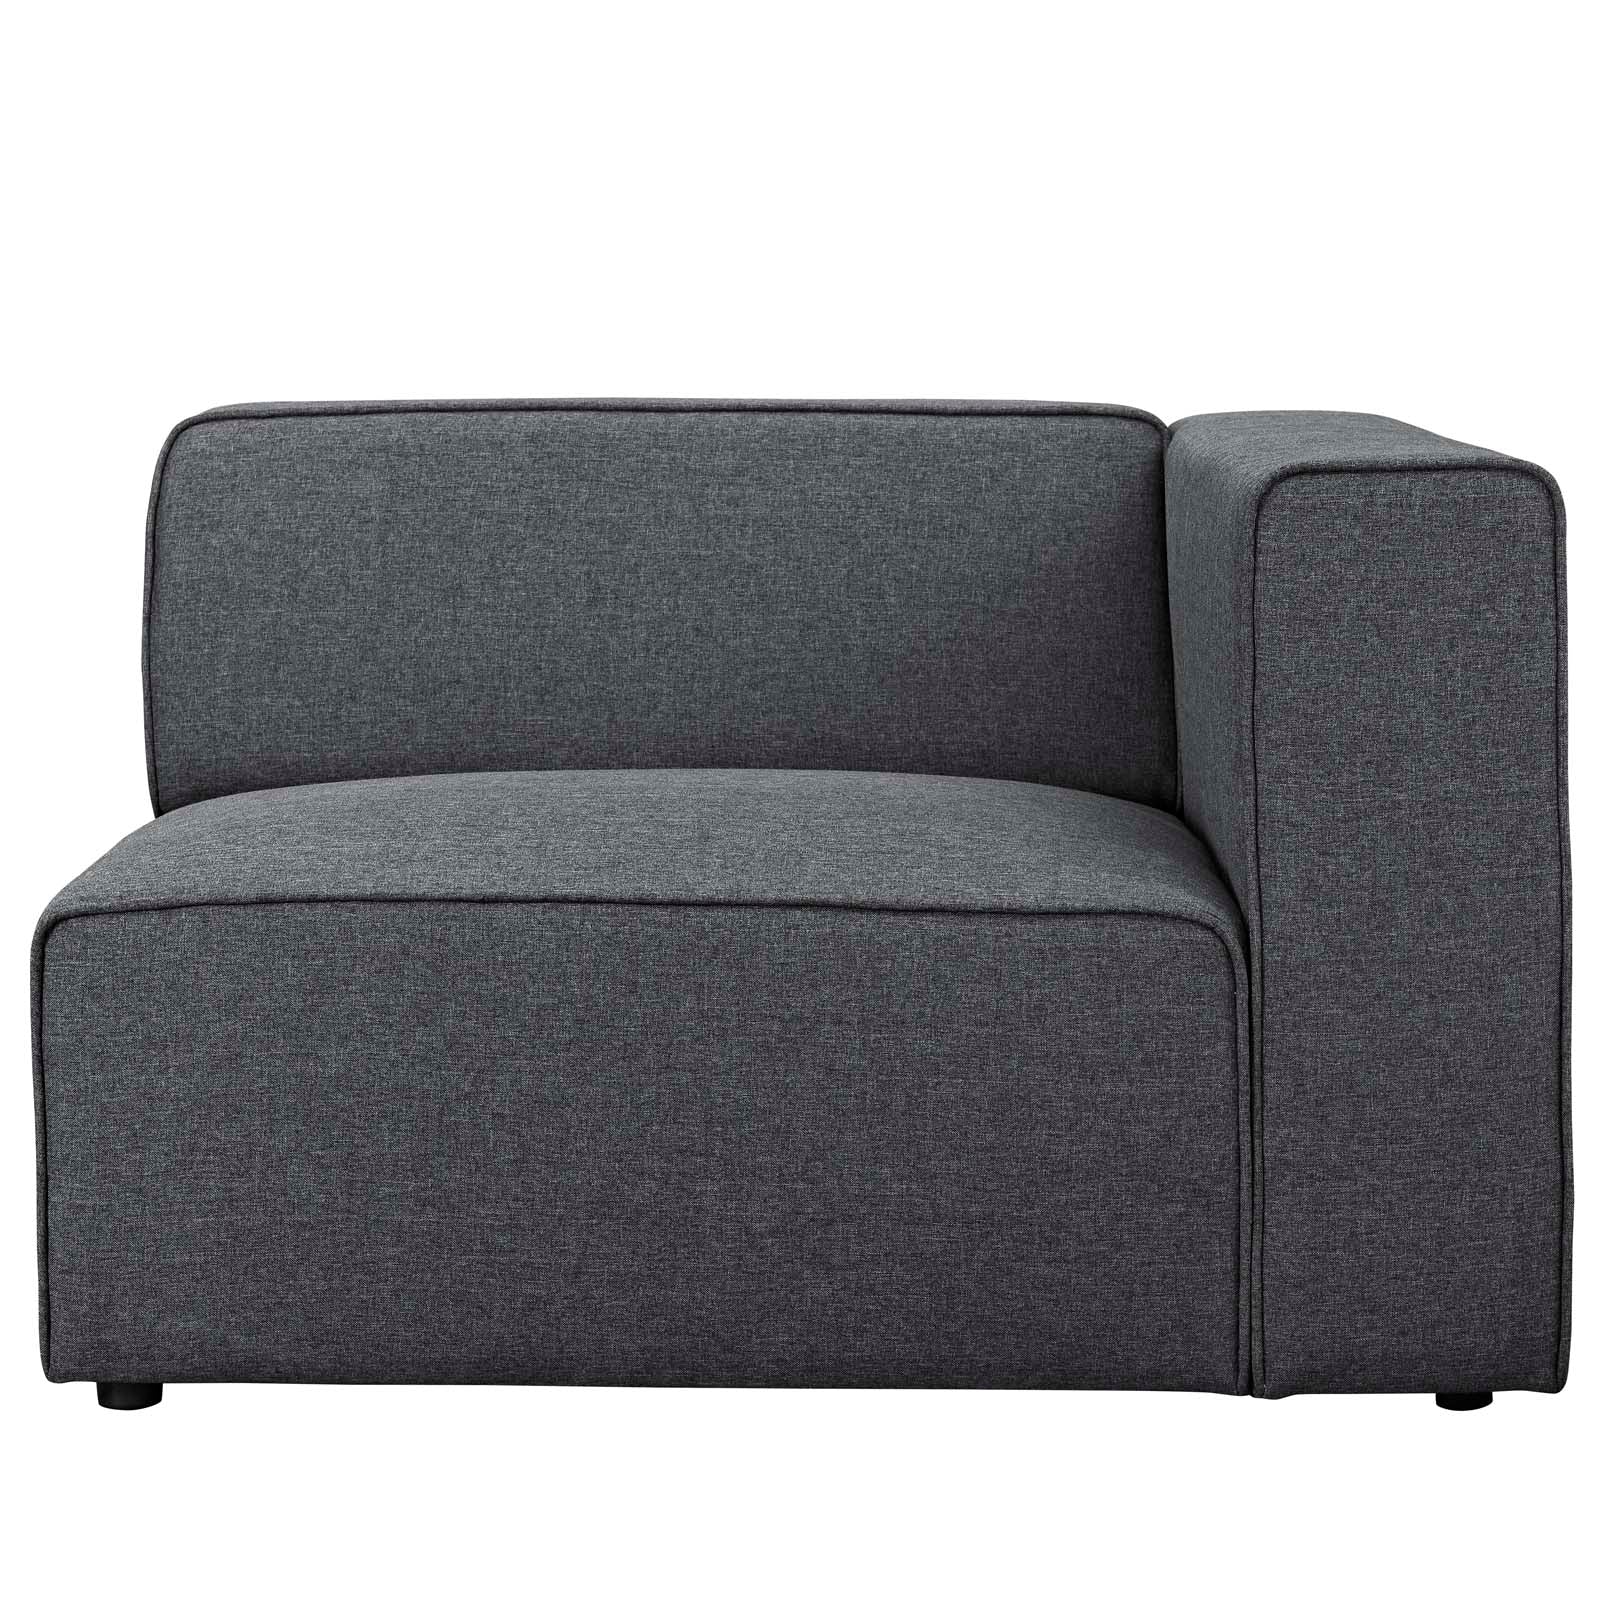 Modway Sofas & Couches - Mingle Fabric Right-Facing Sofa Gray